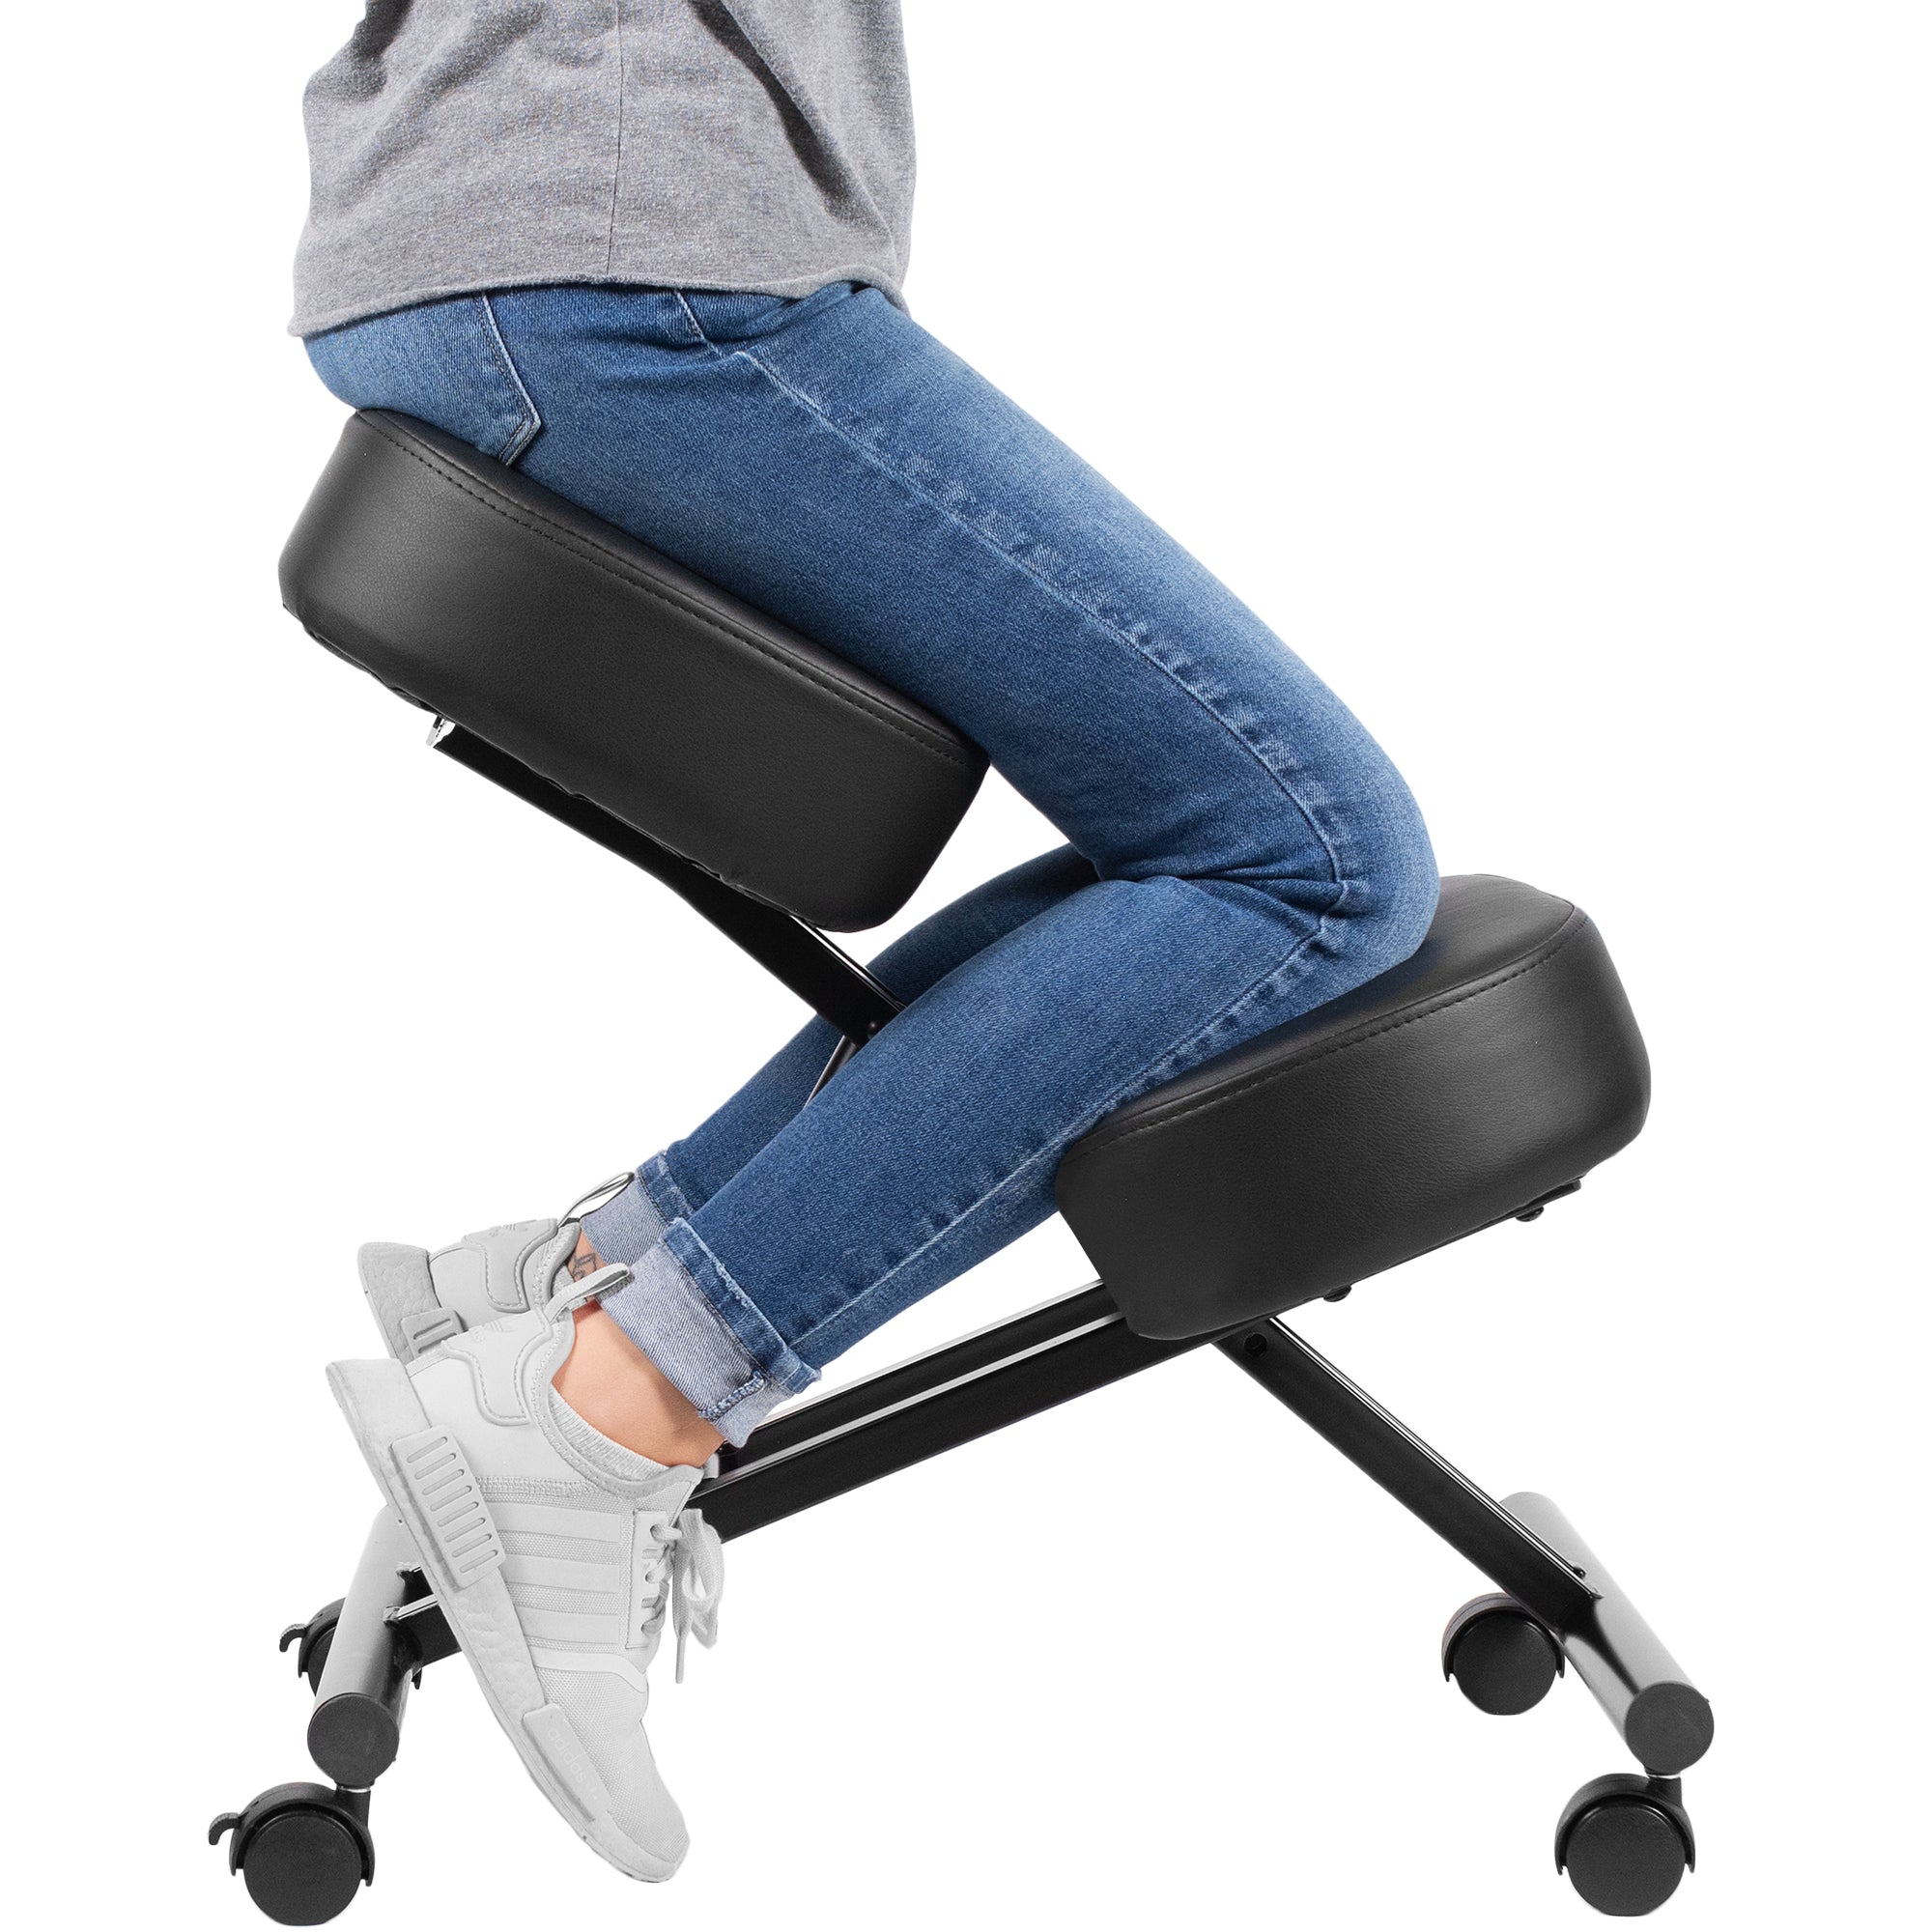 Are Kneeling Chairs Good For You?